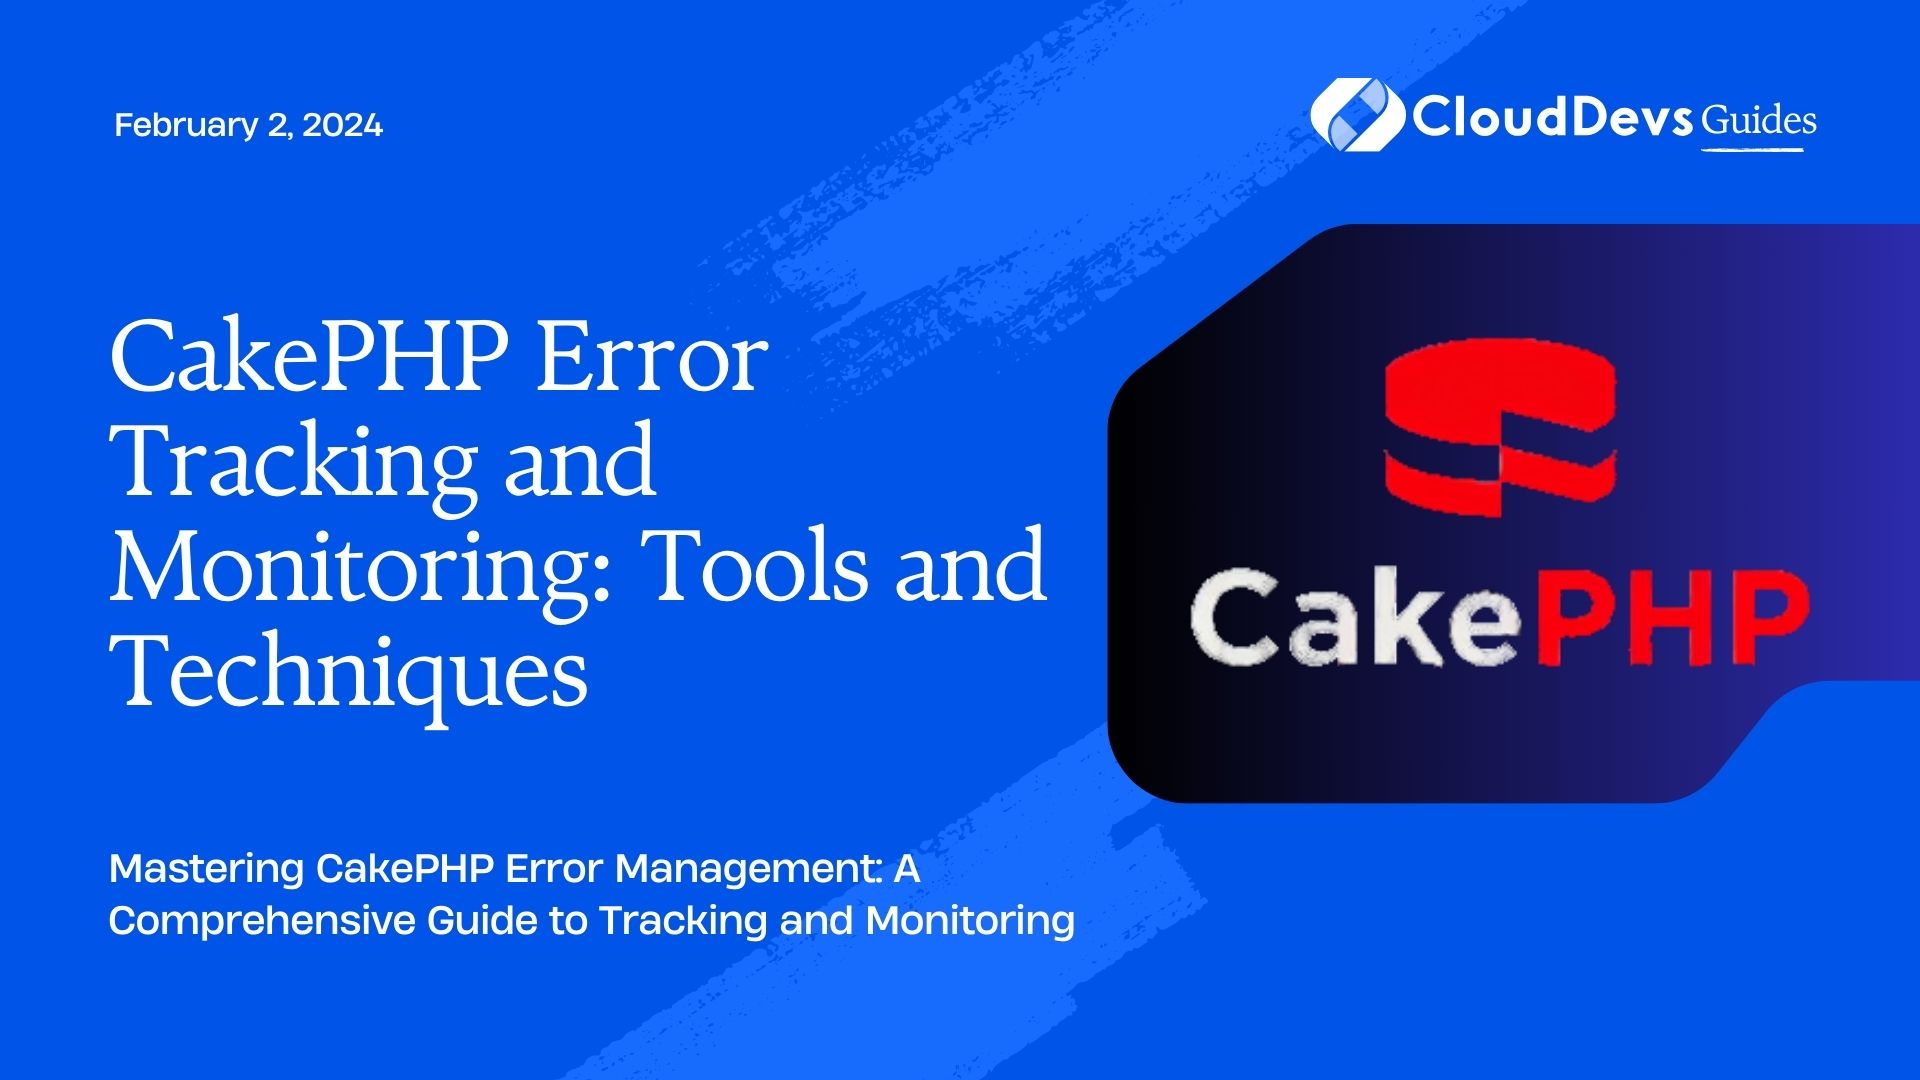 CakePHP Error Tracking and Monitoring: Tools and Techniques